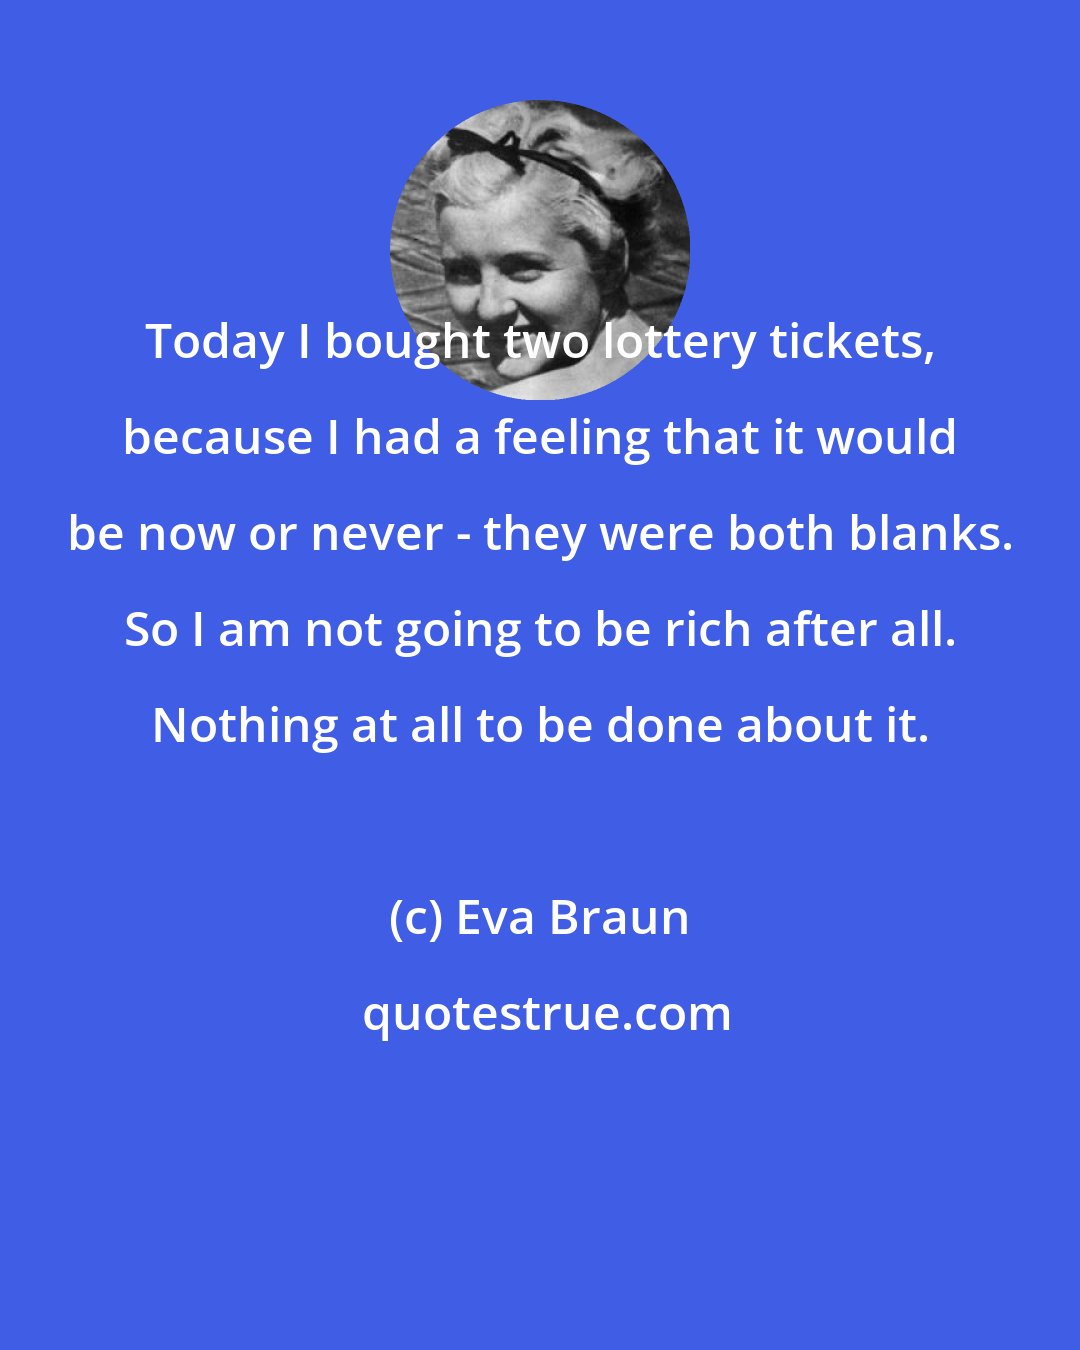 Eva Braun: Today I bought two lottery tickets, because I had a feeling that it would be now or never - they were both blanks. So I am not going to be rich after all. Nothing at all to be done about it.